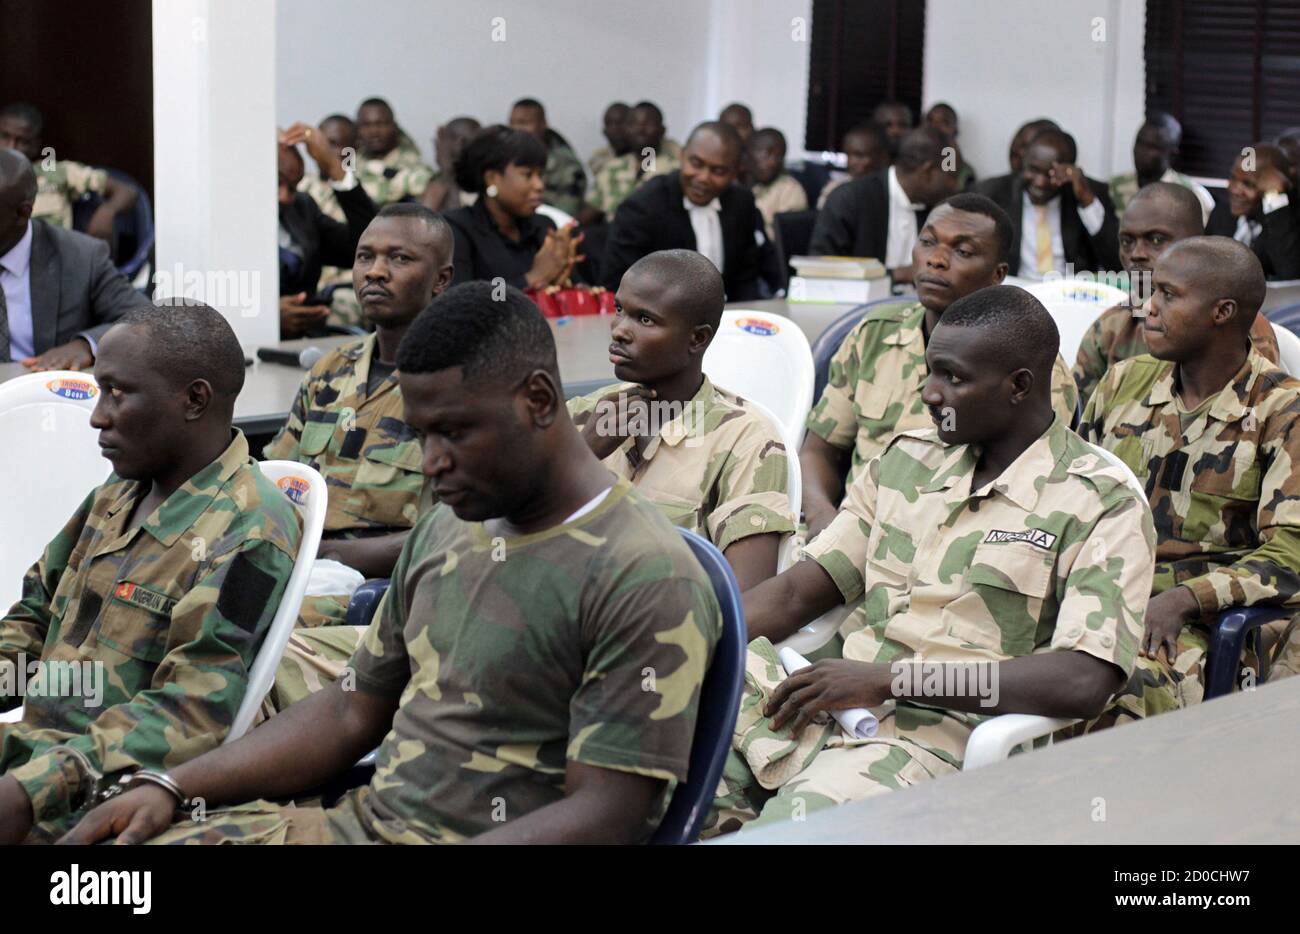 Nigeria soldiers appear before the general court-martial in Abuja October 2, 2014. Nigeria's military court-martialled 97 of its troops on Thursday for offences including mutiny, assault, absconding, house breaking and disorderly behaviour, it said.The president of the court-martial, Brigadier General Musa Yusuf, did not explicitly state that the trials related to soldiers' conduct in a war against Islamist insurgents Boko Haram, but the troops were all serving in Maiduguri in the northeast, epicentre of the conflict. REUTERS/Afolabi Sotunde (NIGERIA - Tags: MILITARY CRIME LAW) Stock Photo